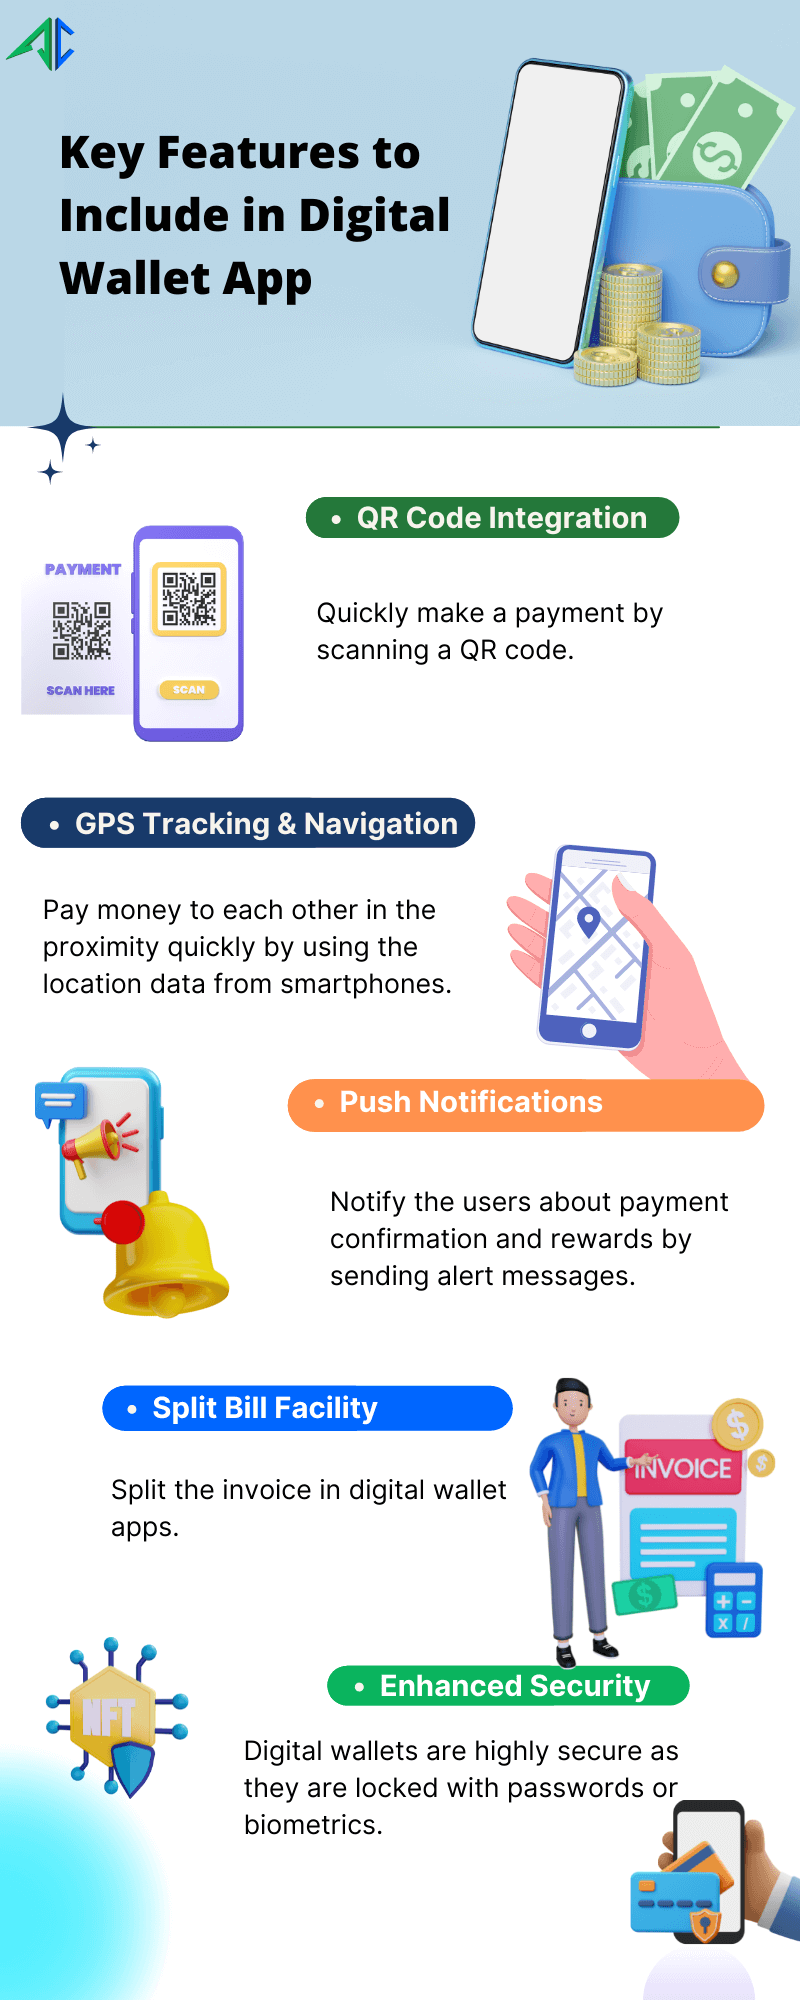 Key Features to Include in Digital Wallet App